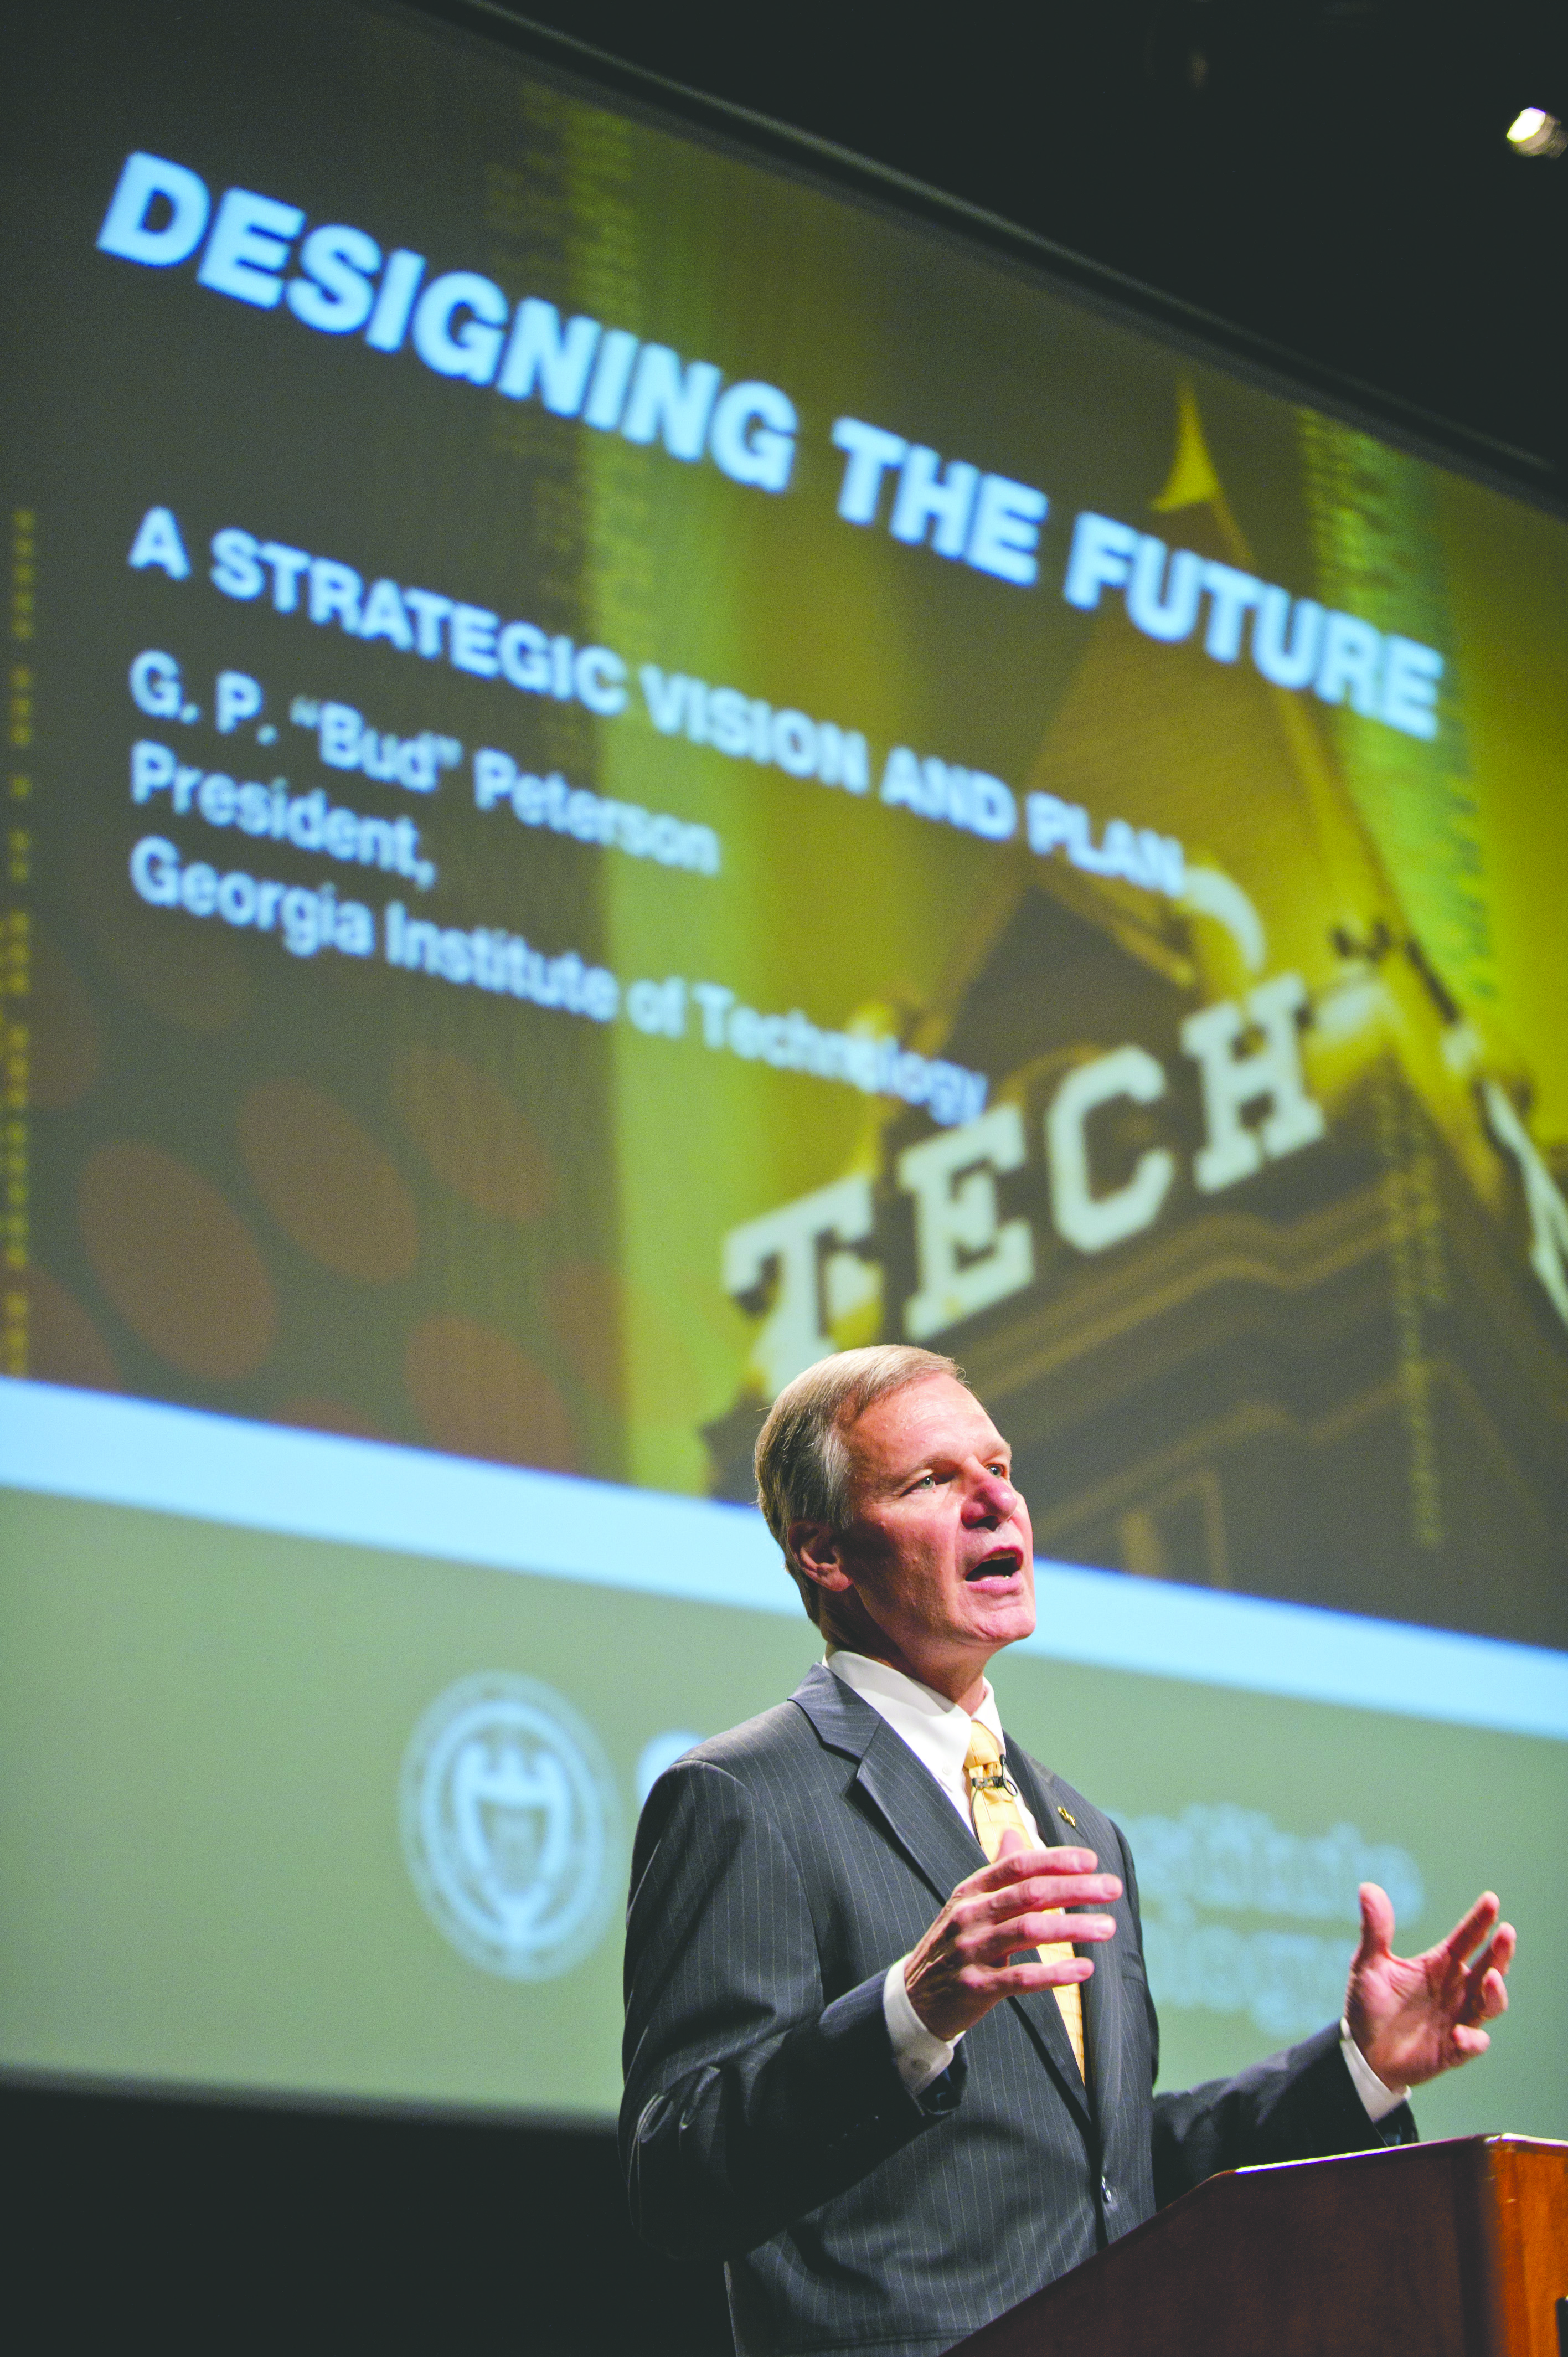 President G. P. “Bud” Peterson announces the 25-year strategic plan, Designing the Future, last fall. Since then, campus units have been brainstorming ways to implement it.